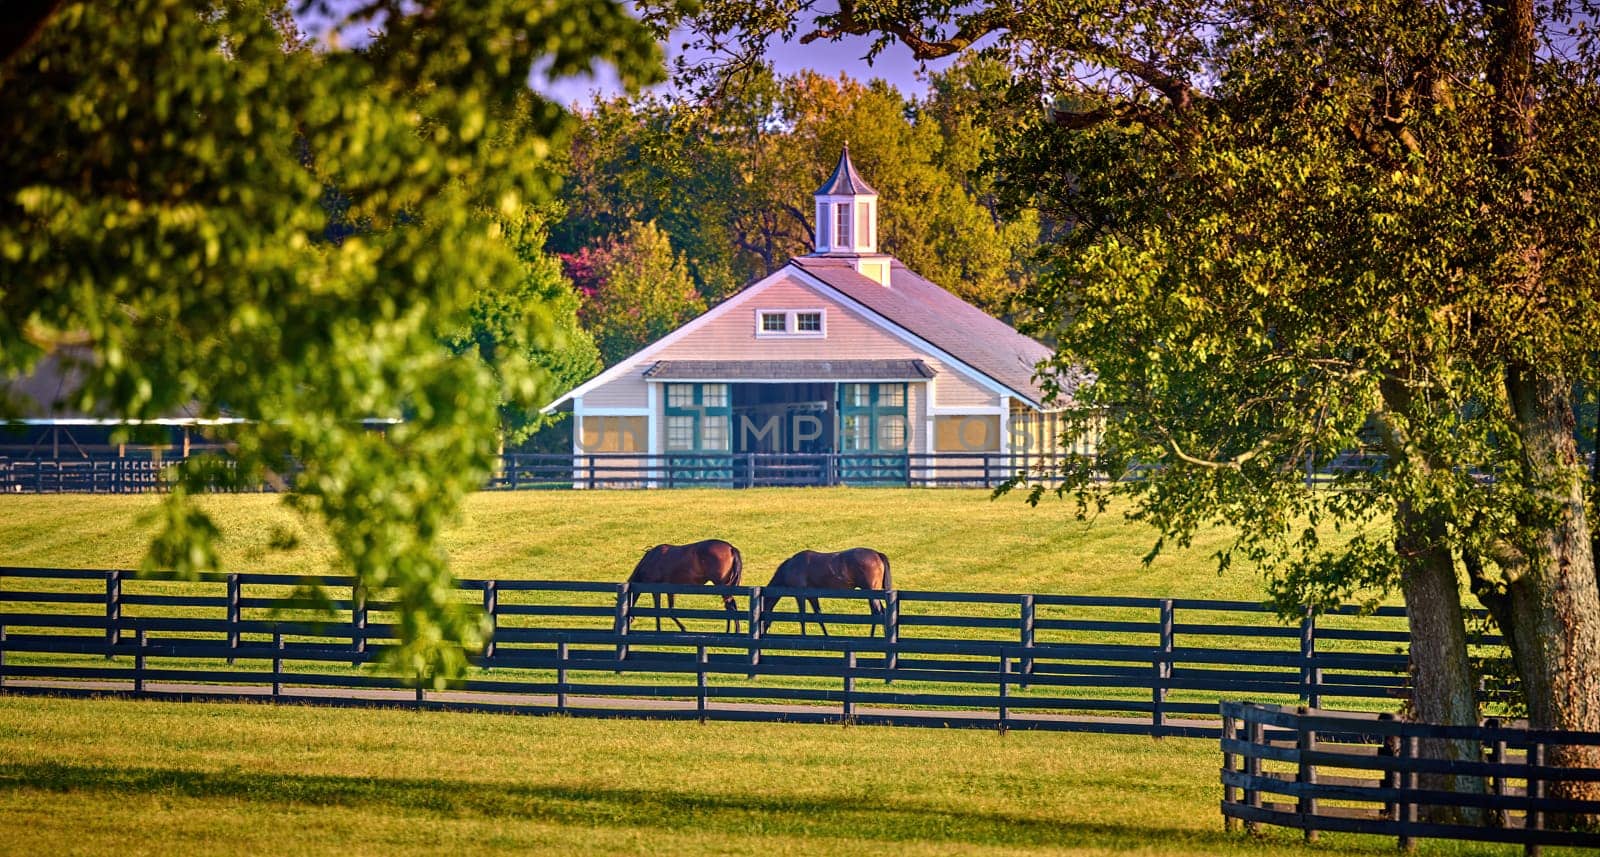 Two horses grazing with a horse barn in the background.